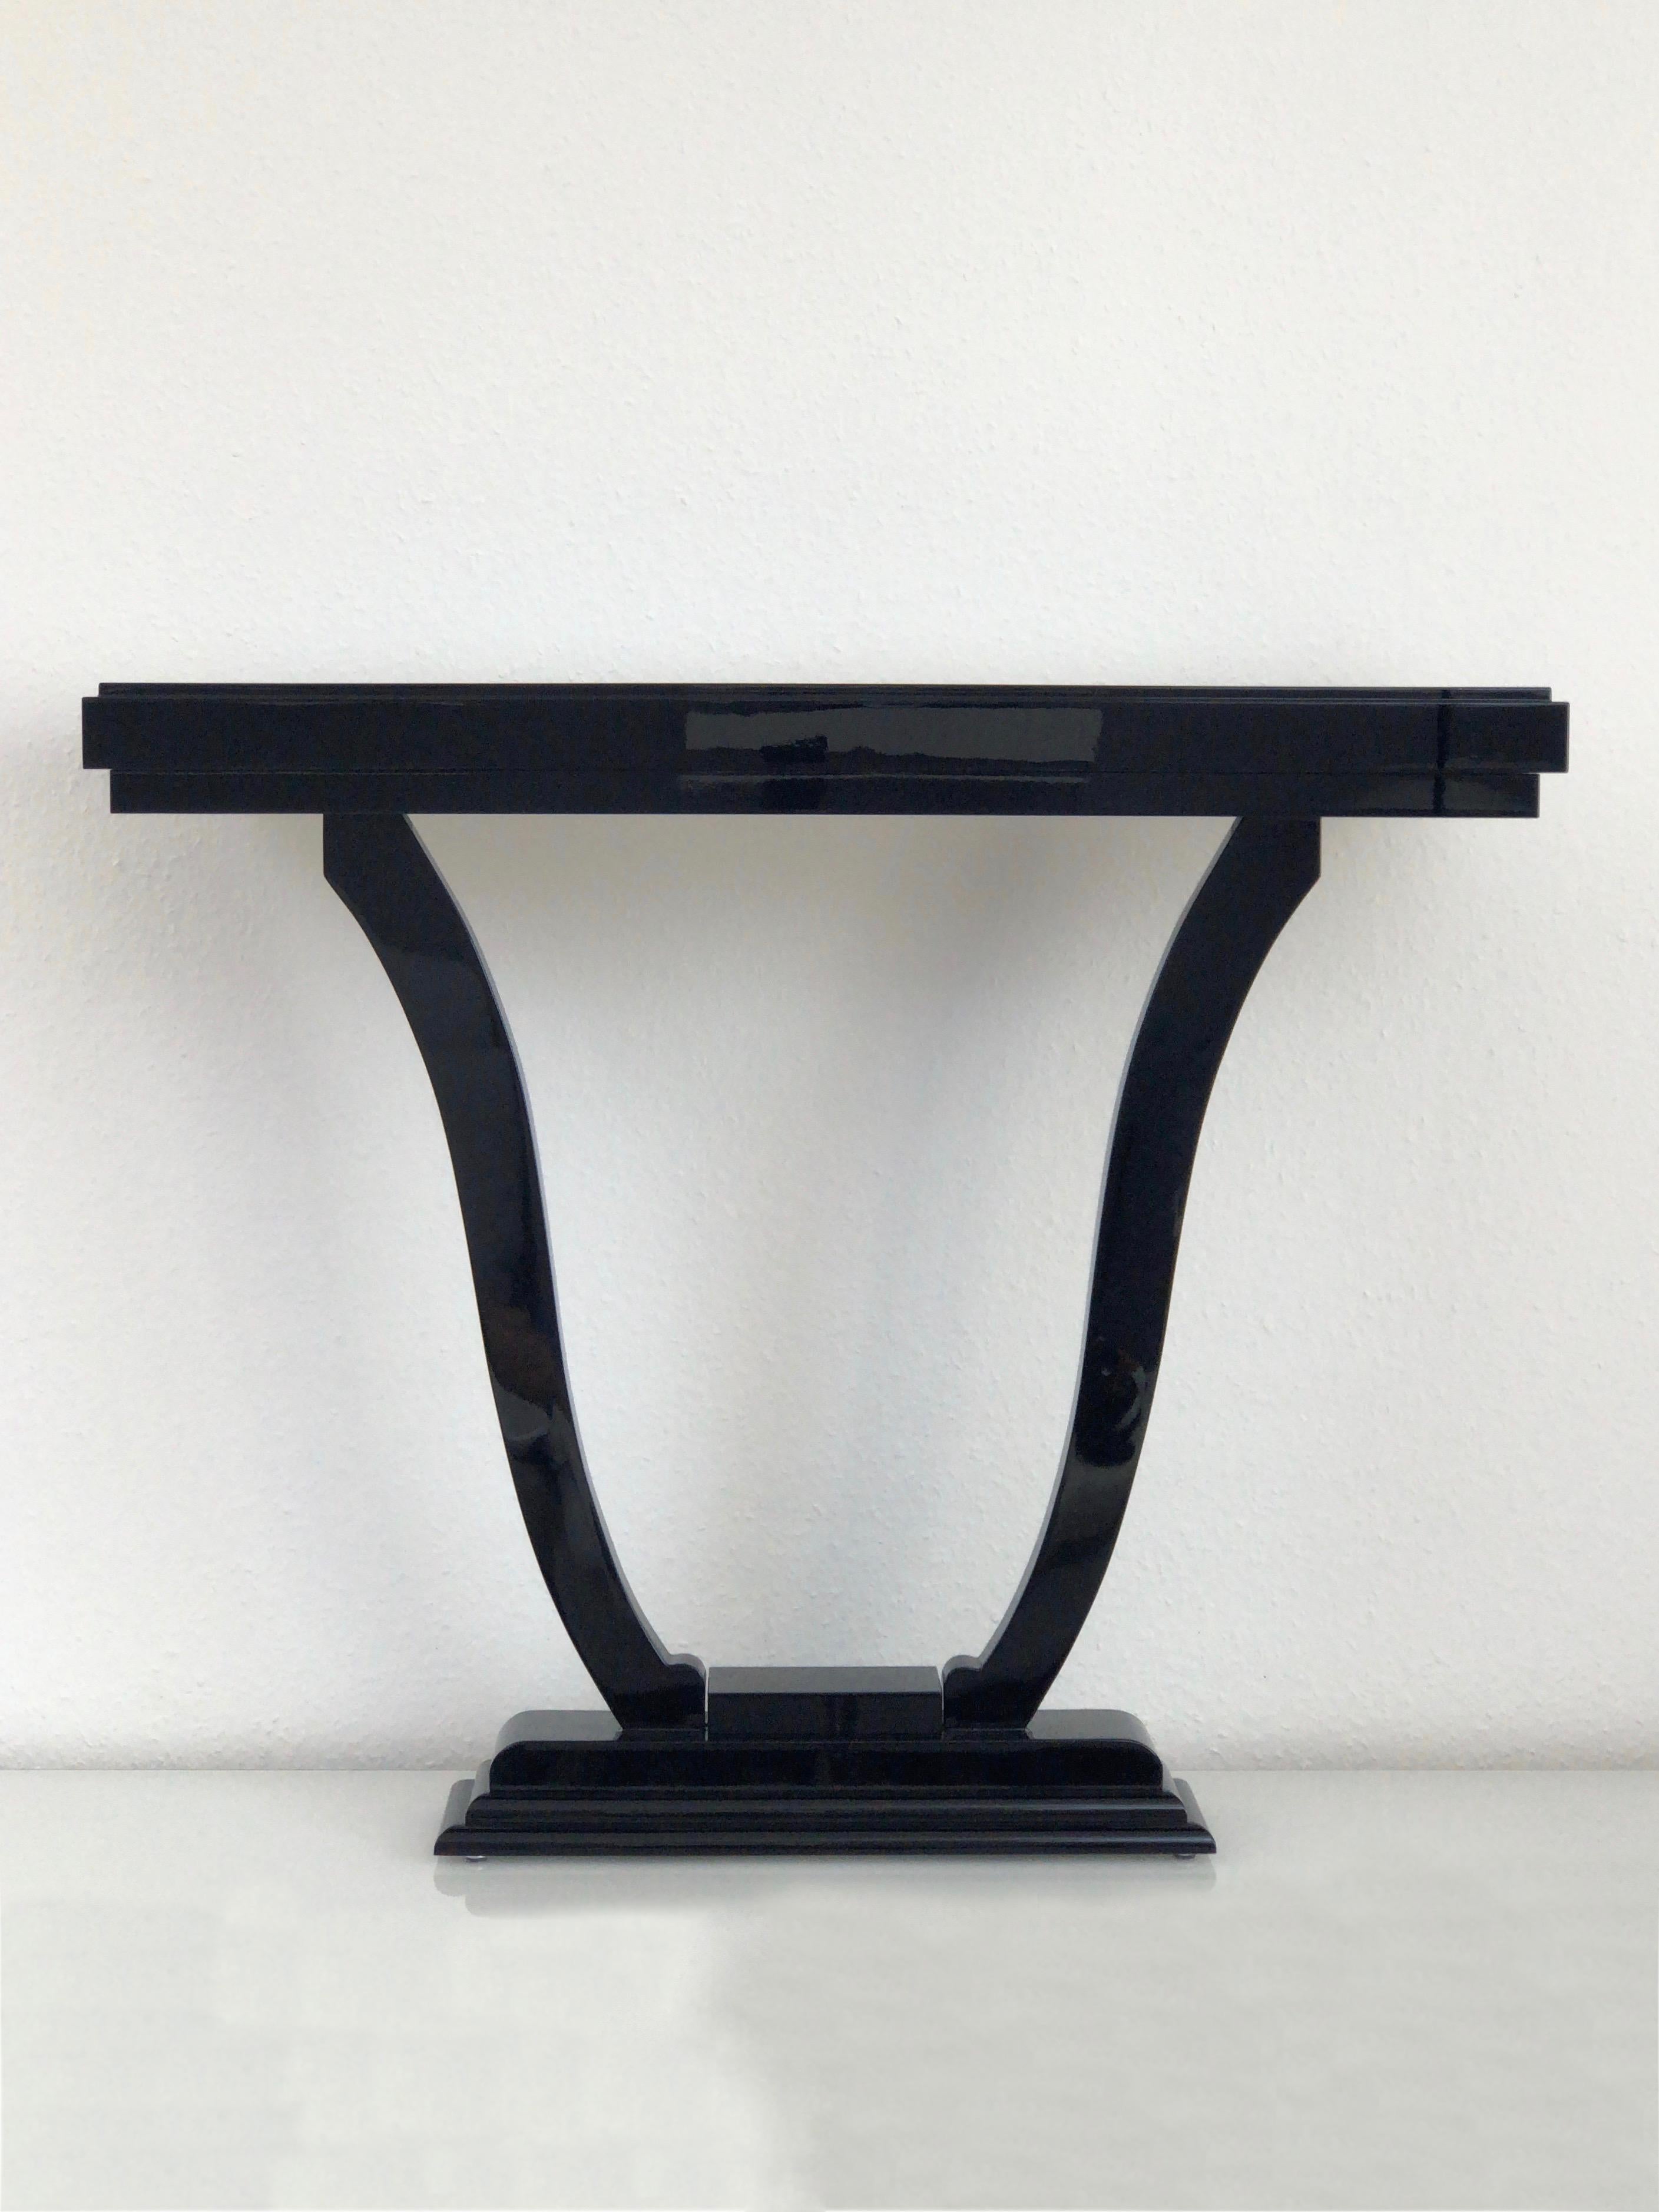 Black high gloss piano lacquered console table. 
Original tulip-shaped foot with a new tabletop. In French it is called 